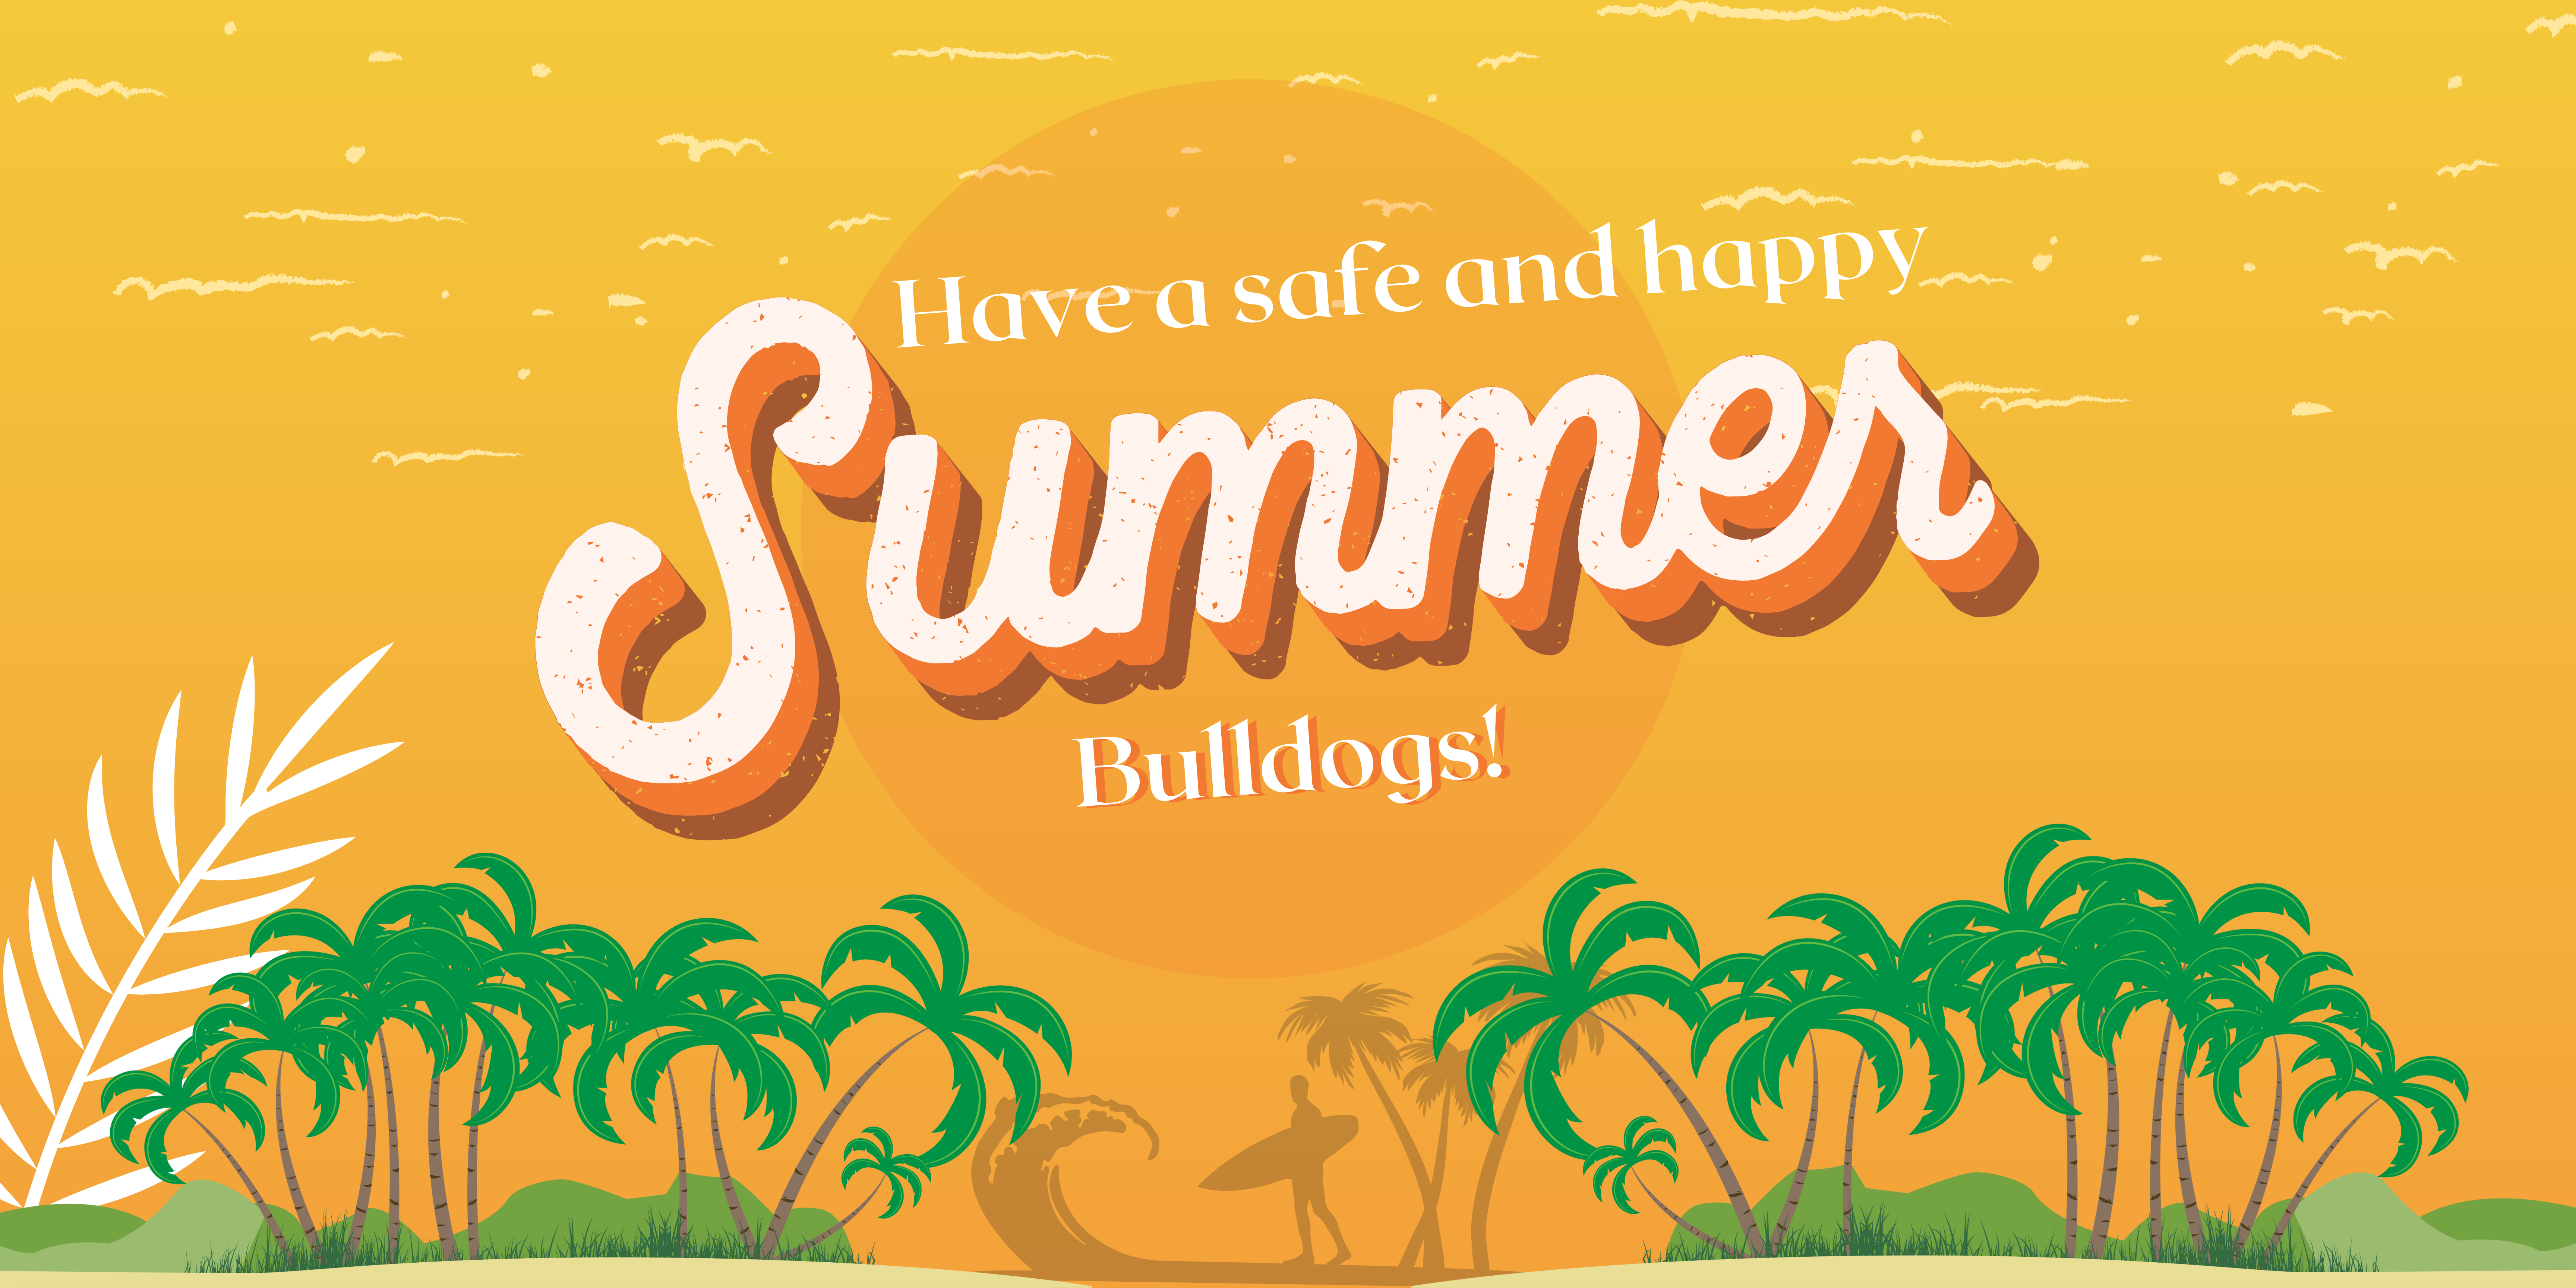 Have a safe and happy summer